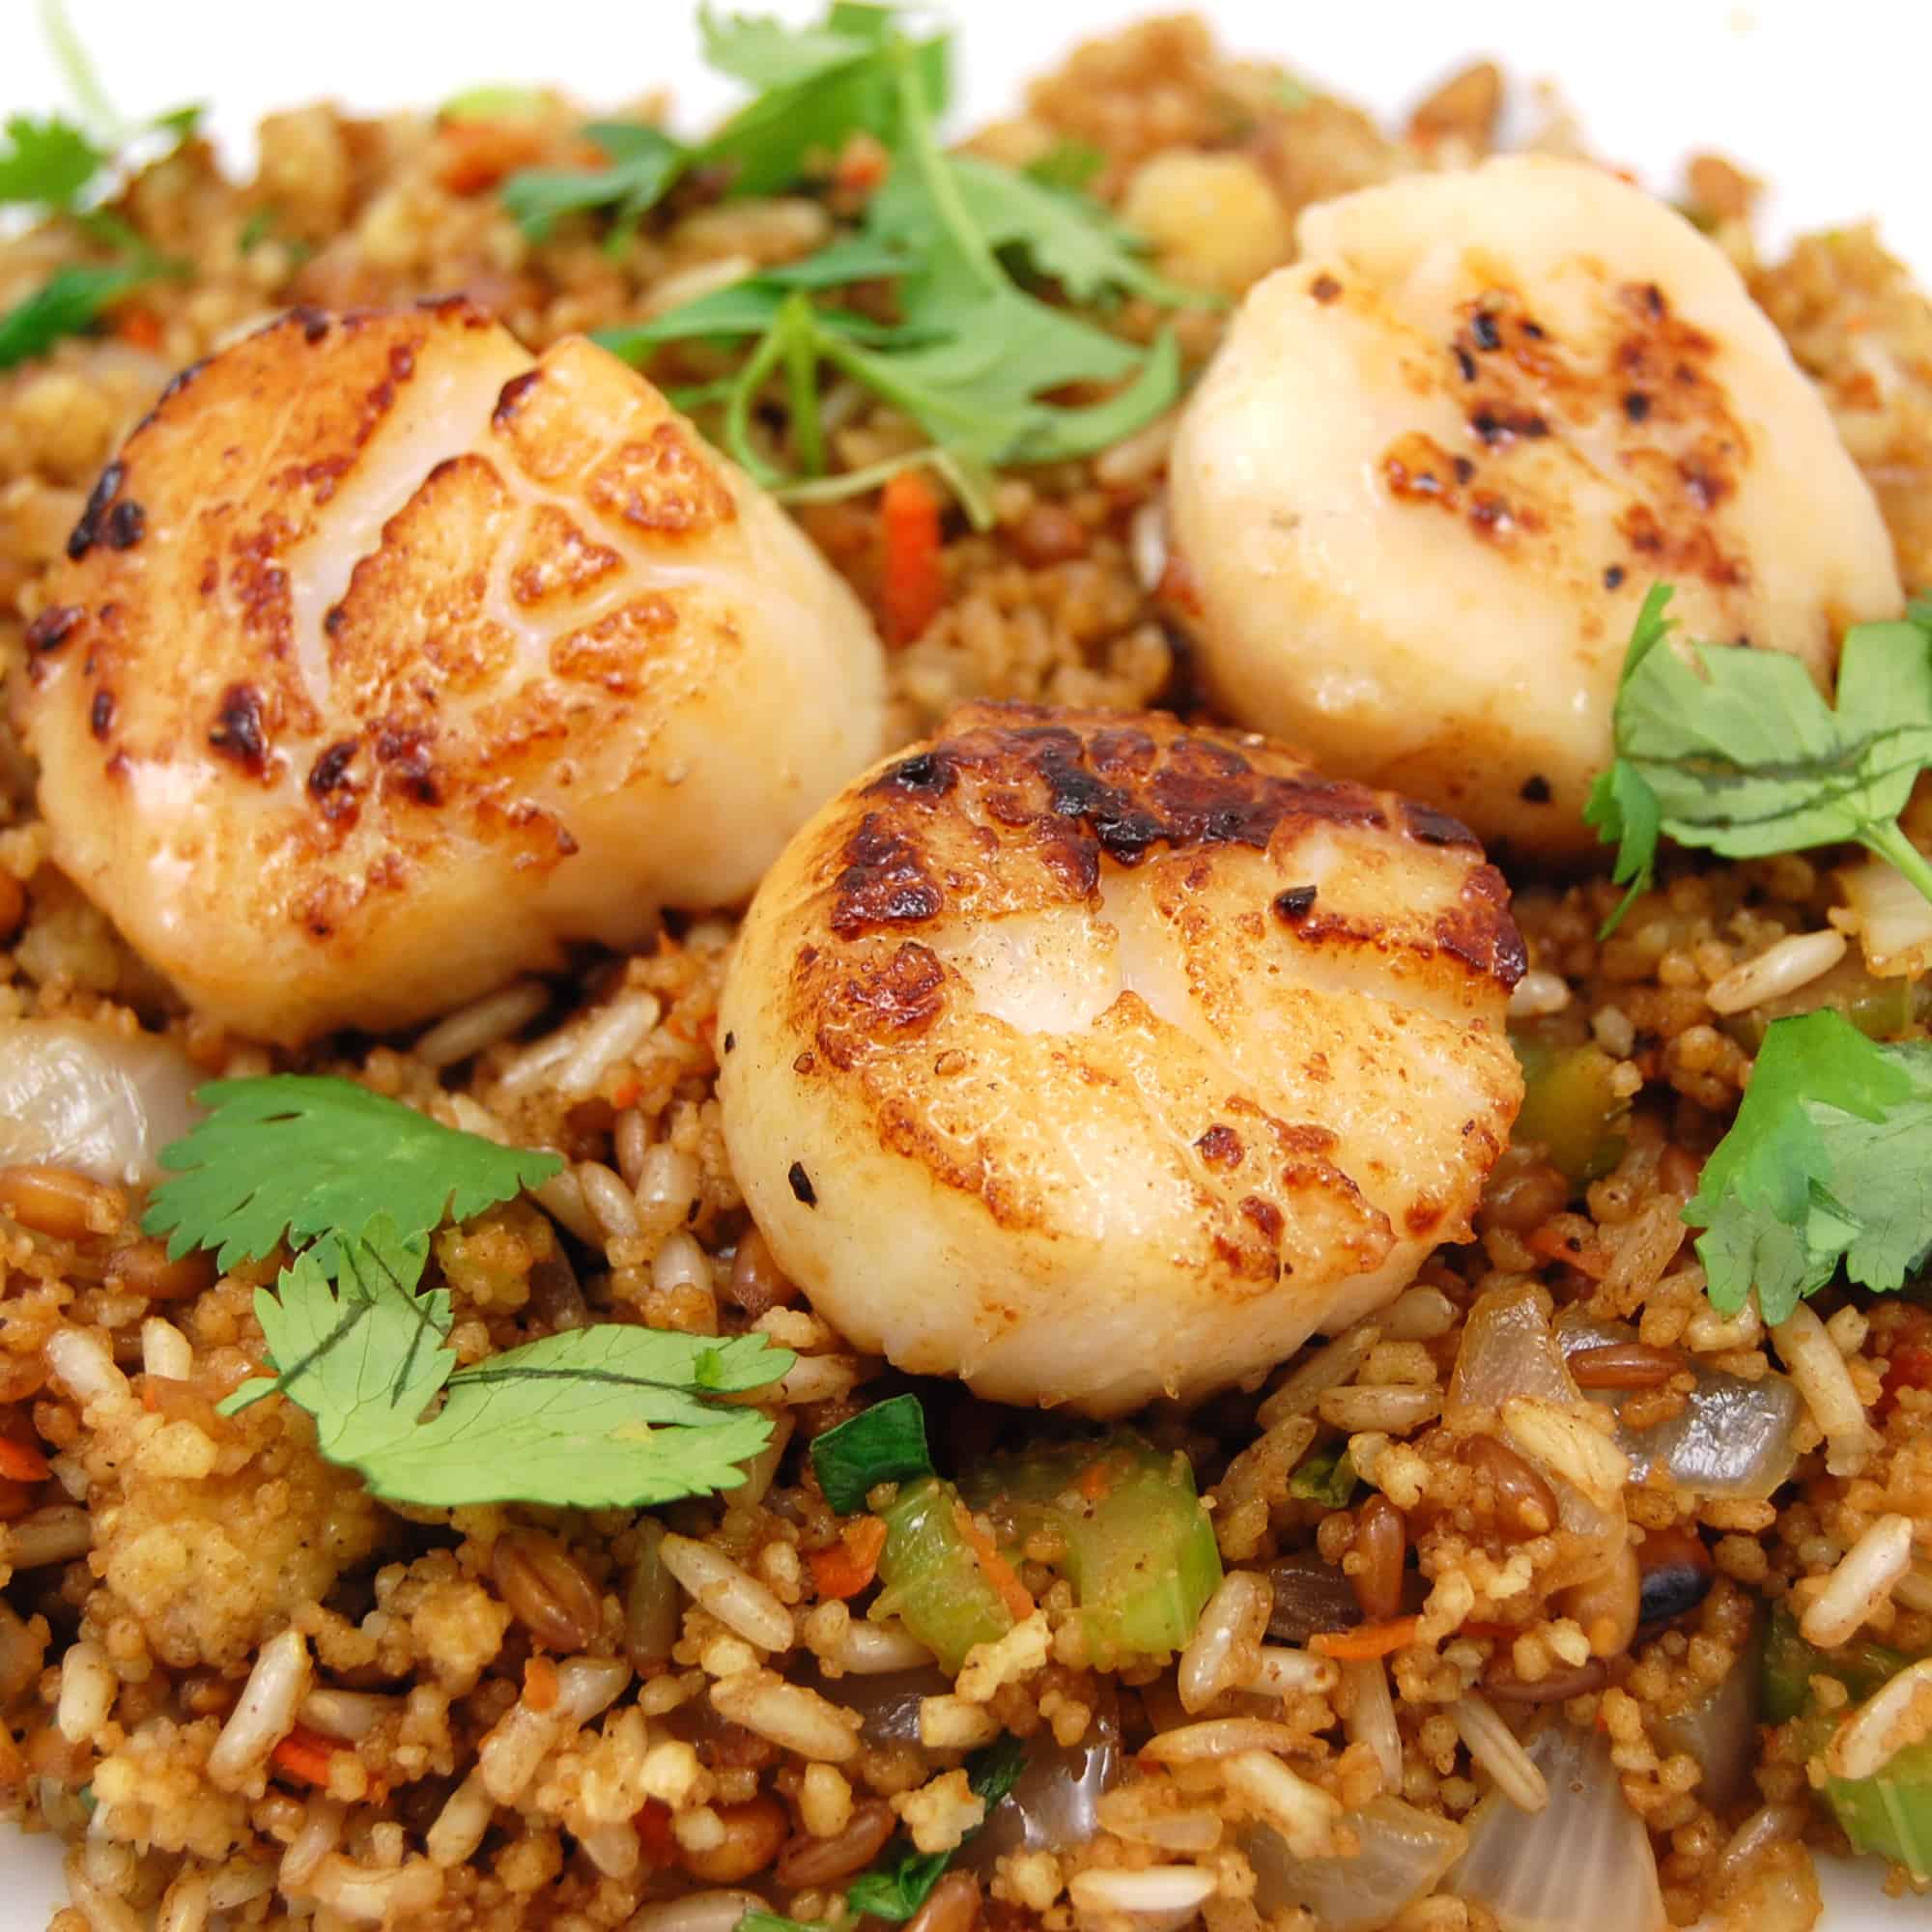 Mixed Grain Pilaf with Pan Seared Scallops